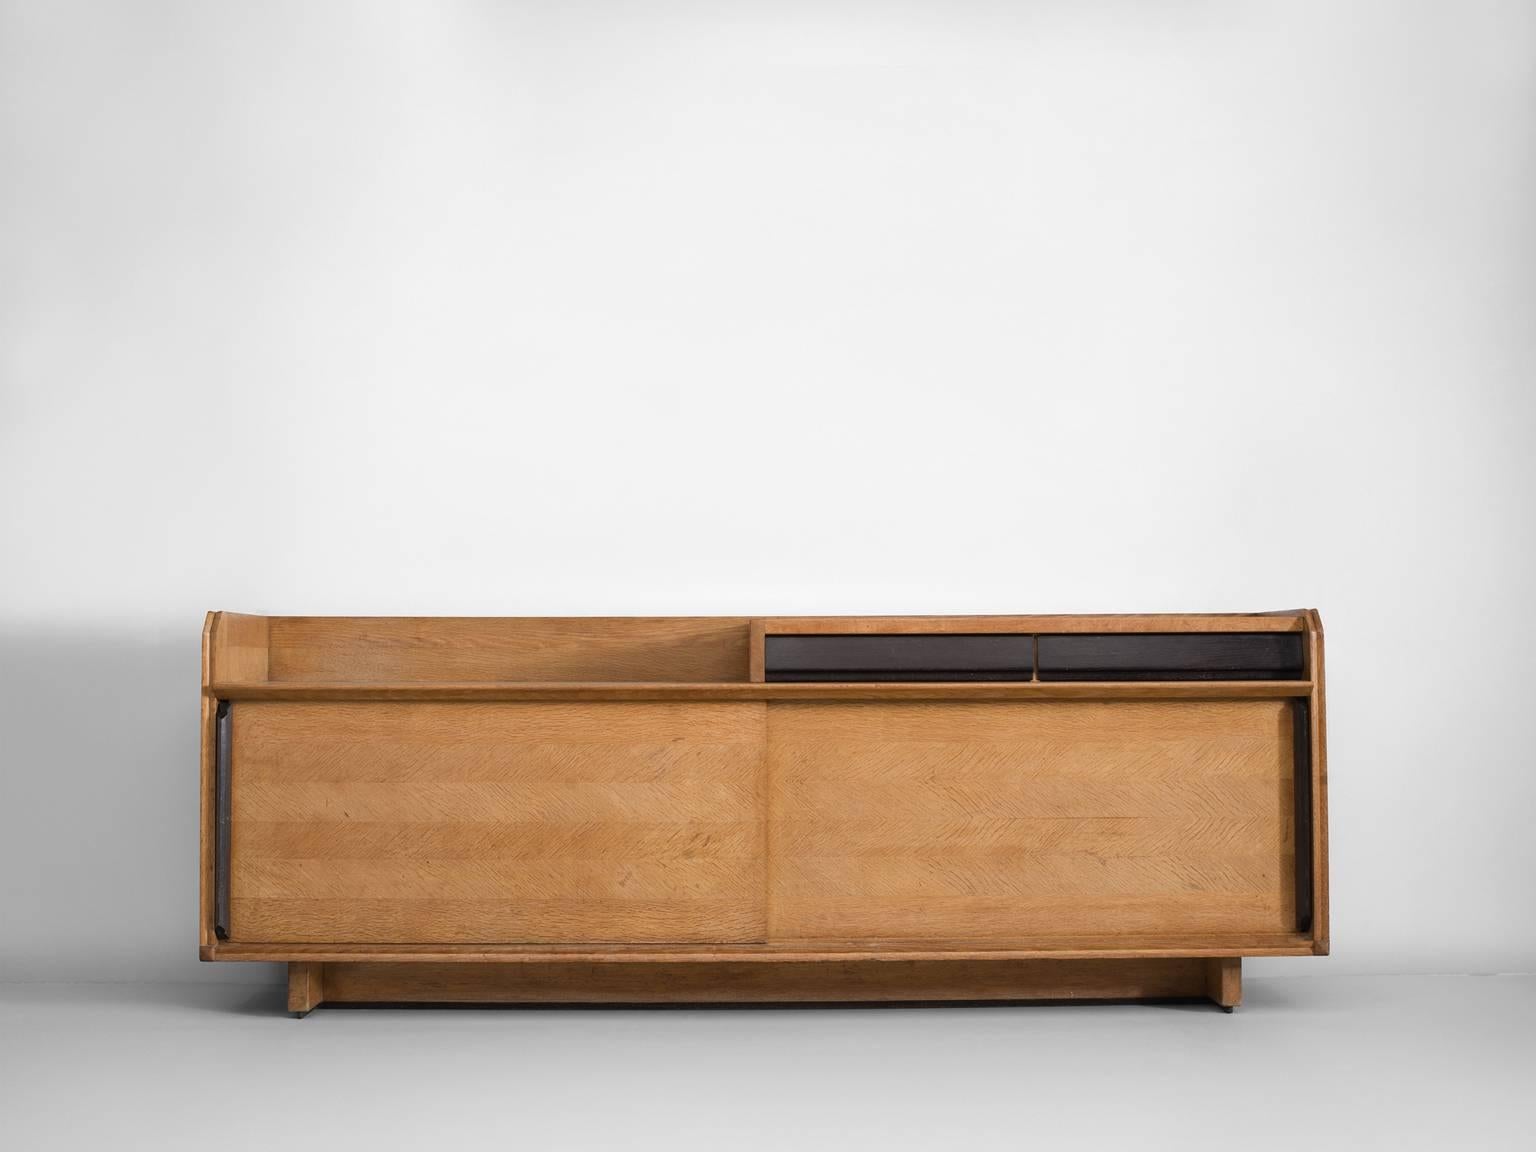 Credenza, in oak, metal and ceramic, by Robert Guillerme et Jacques Chambron for Votre Maison, France, 1960s.

This cabinet is designed by the French designer duo Guillerme and Chambron. The sideboard is characterised by the oakwood inlay patterns